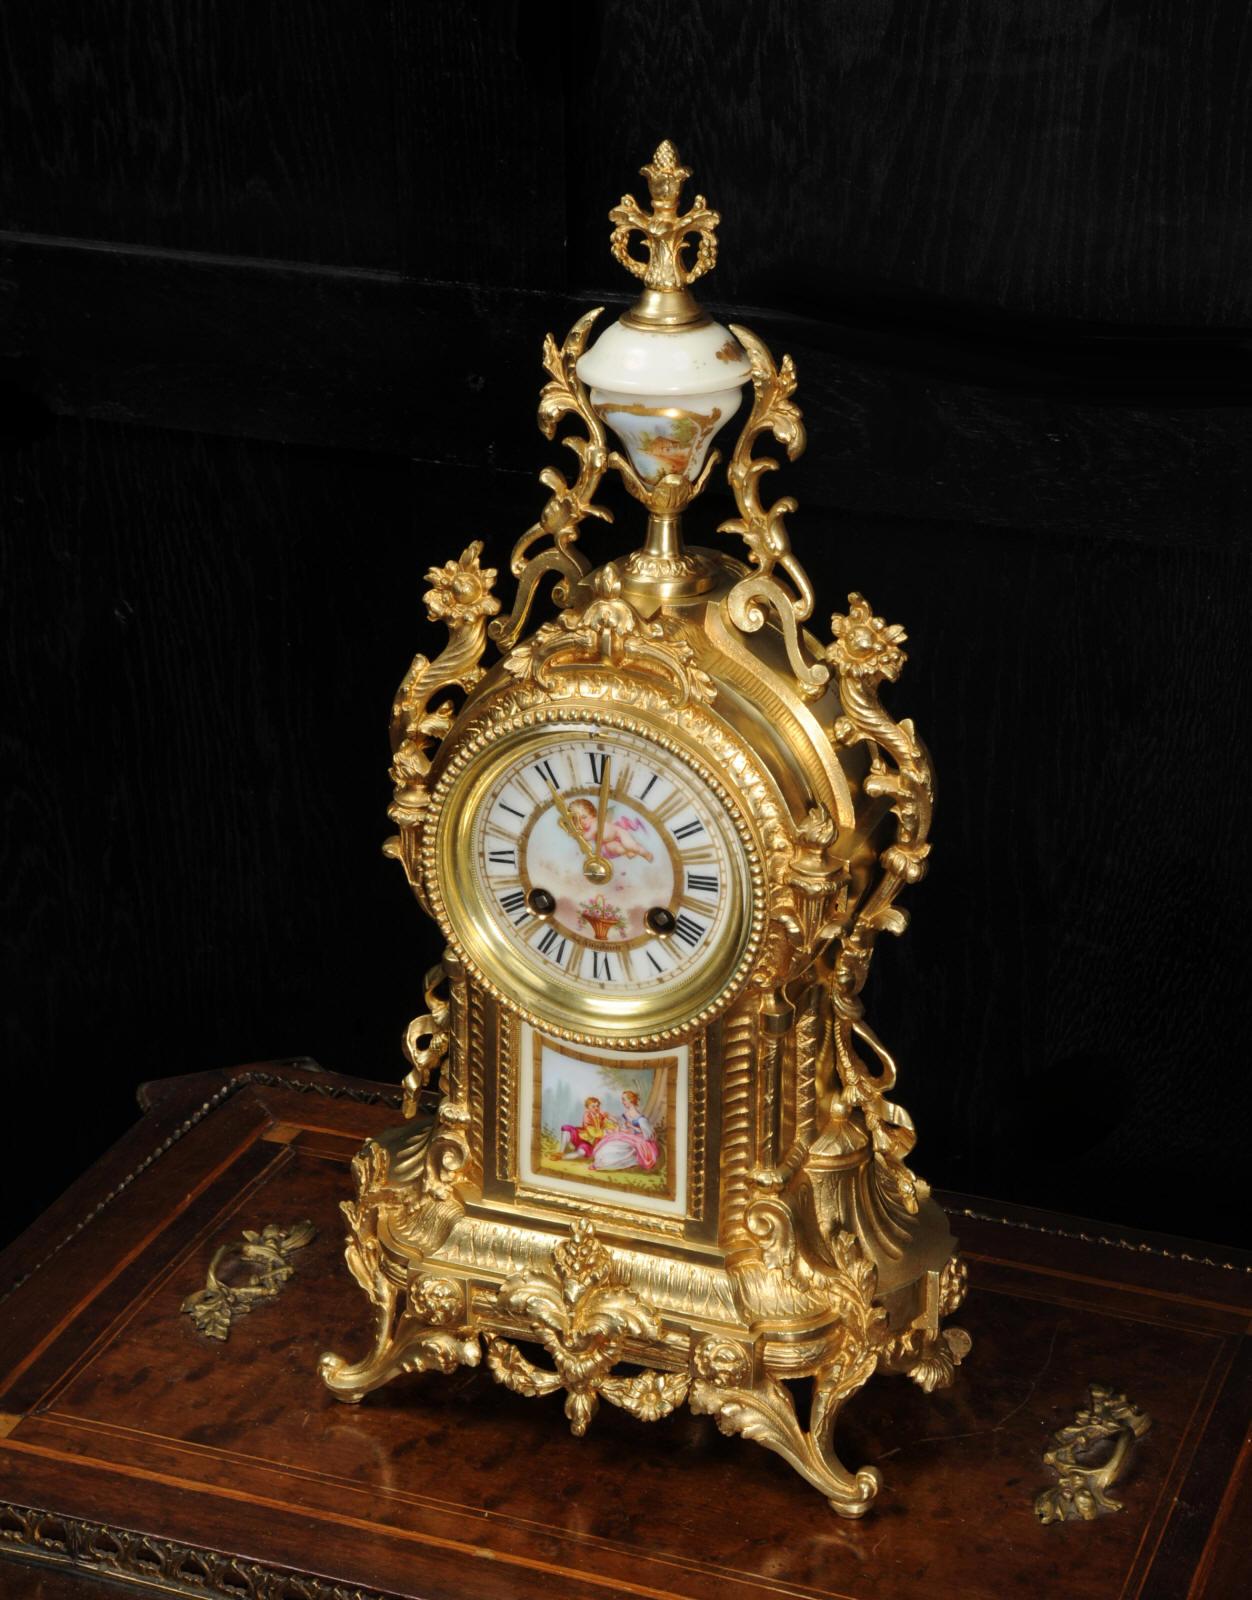 19th Century Antique French Ormolu and Sevres Porcelain Clock, Love